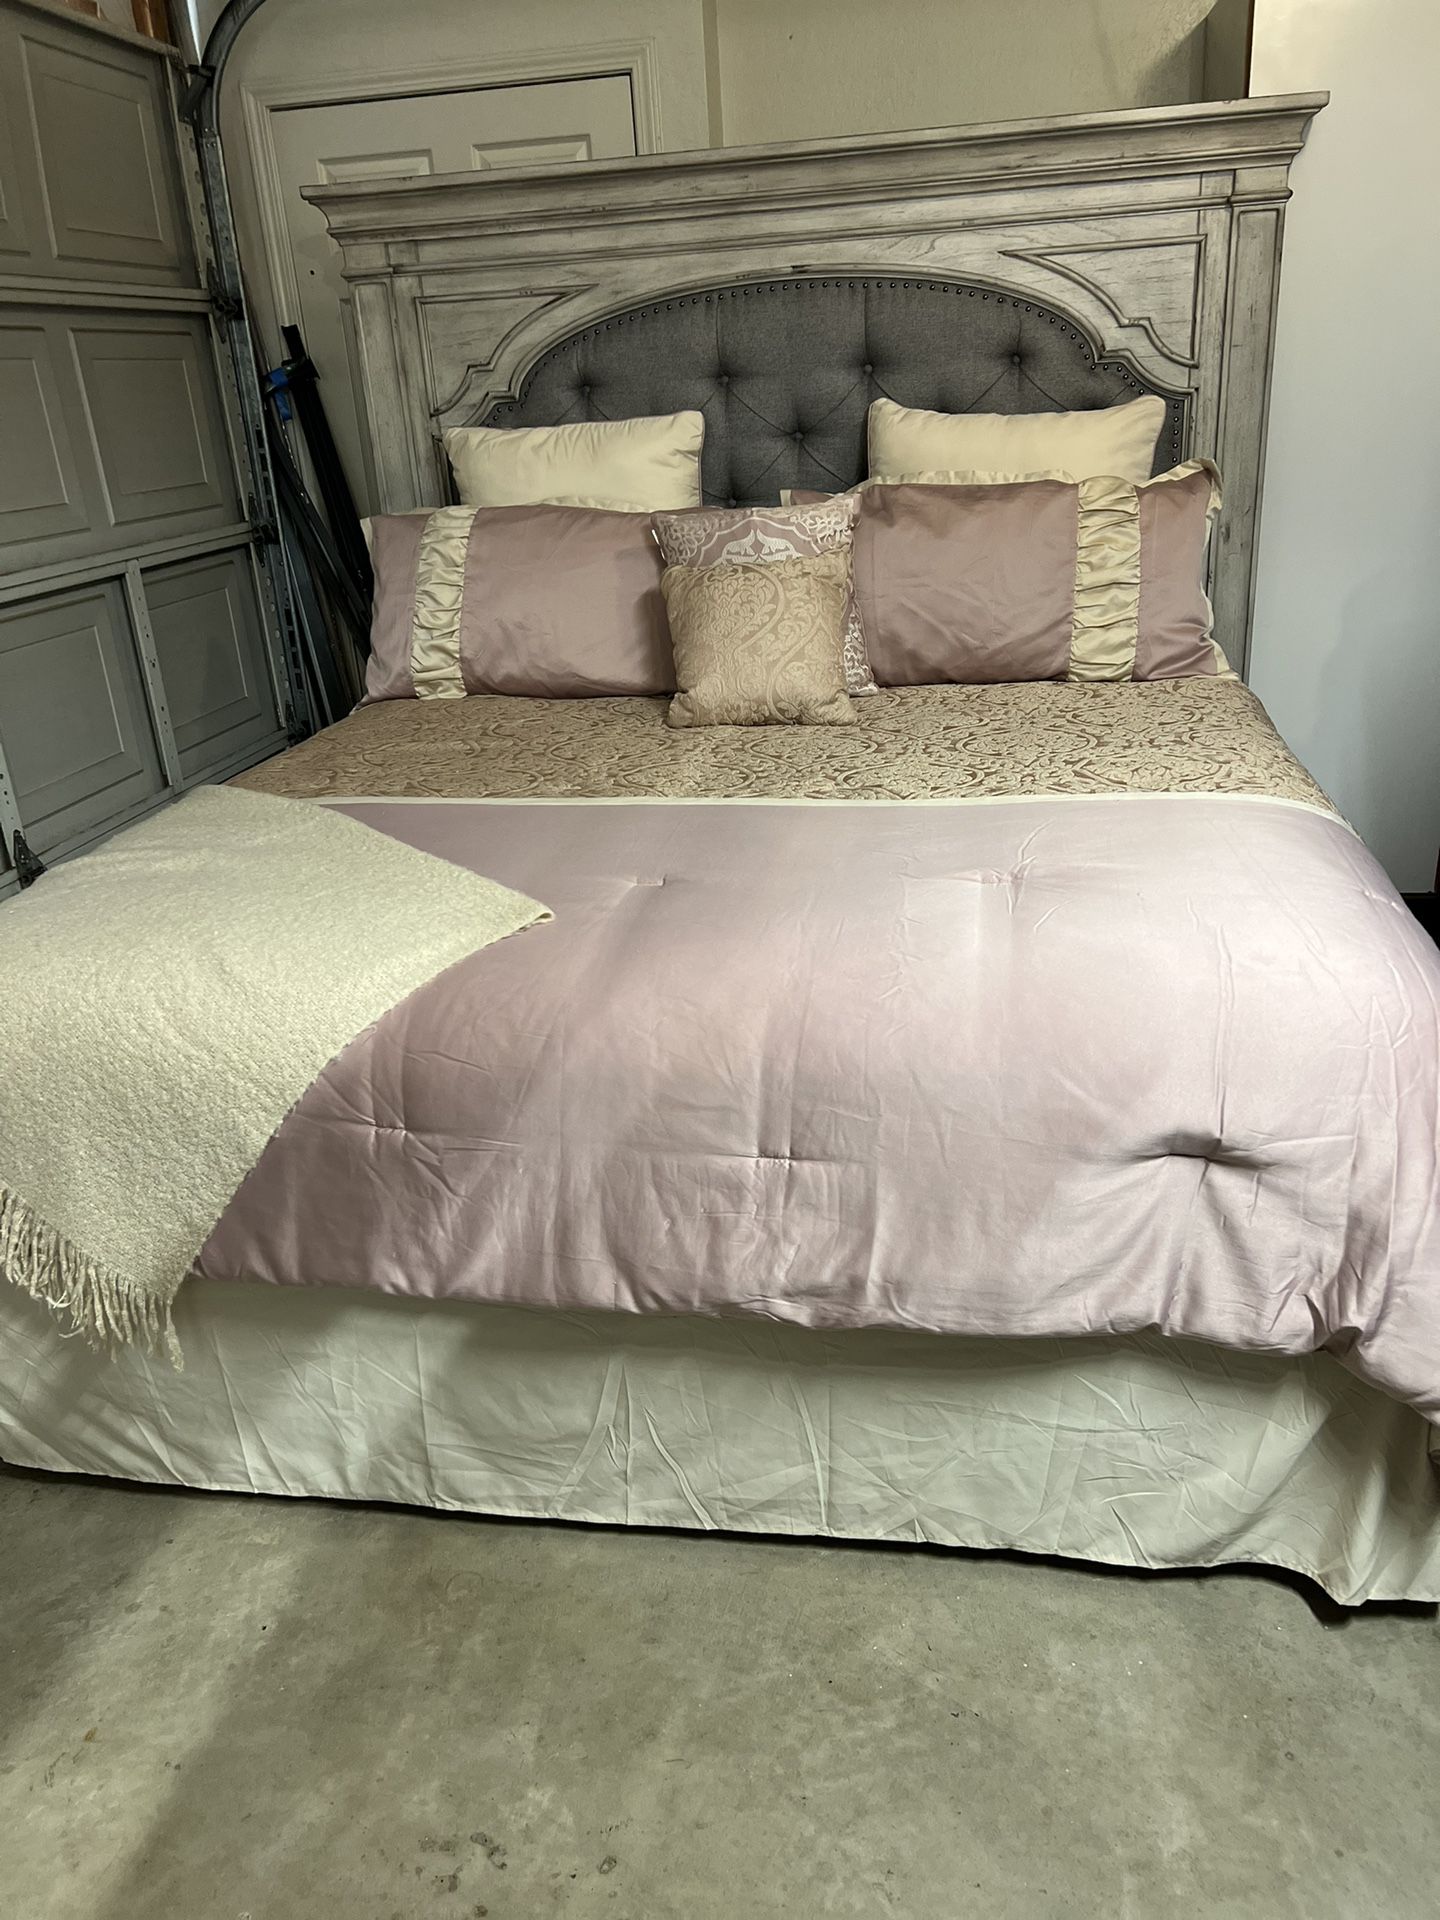 King size bed. Includes metal frame, two box springs, and a very plush and comfortable mattress. Hablo español y hago entrego